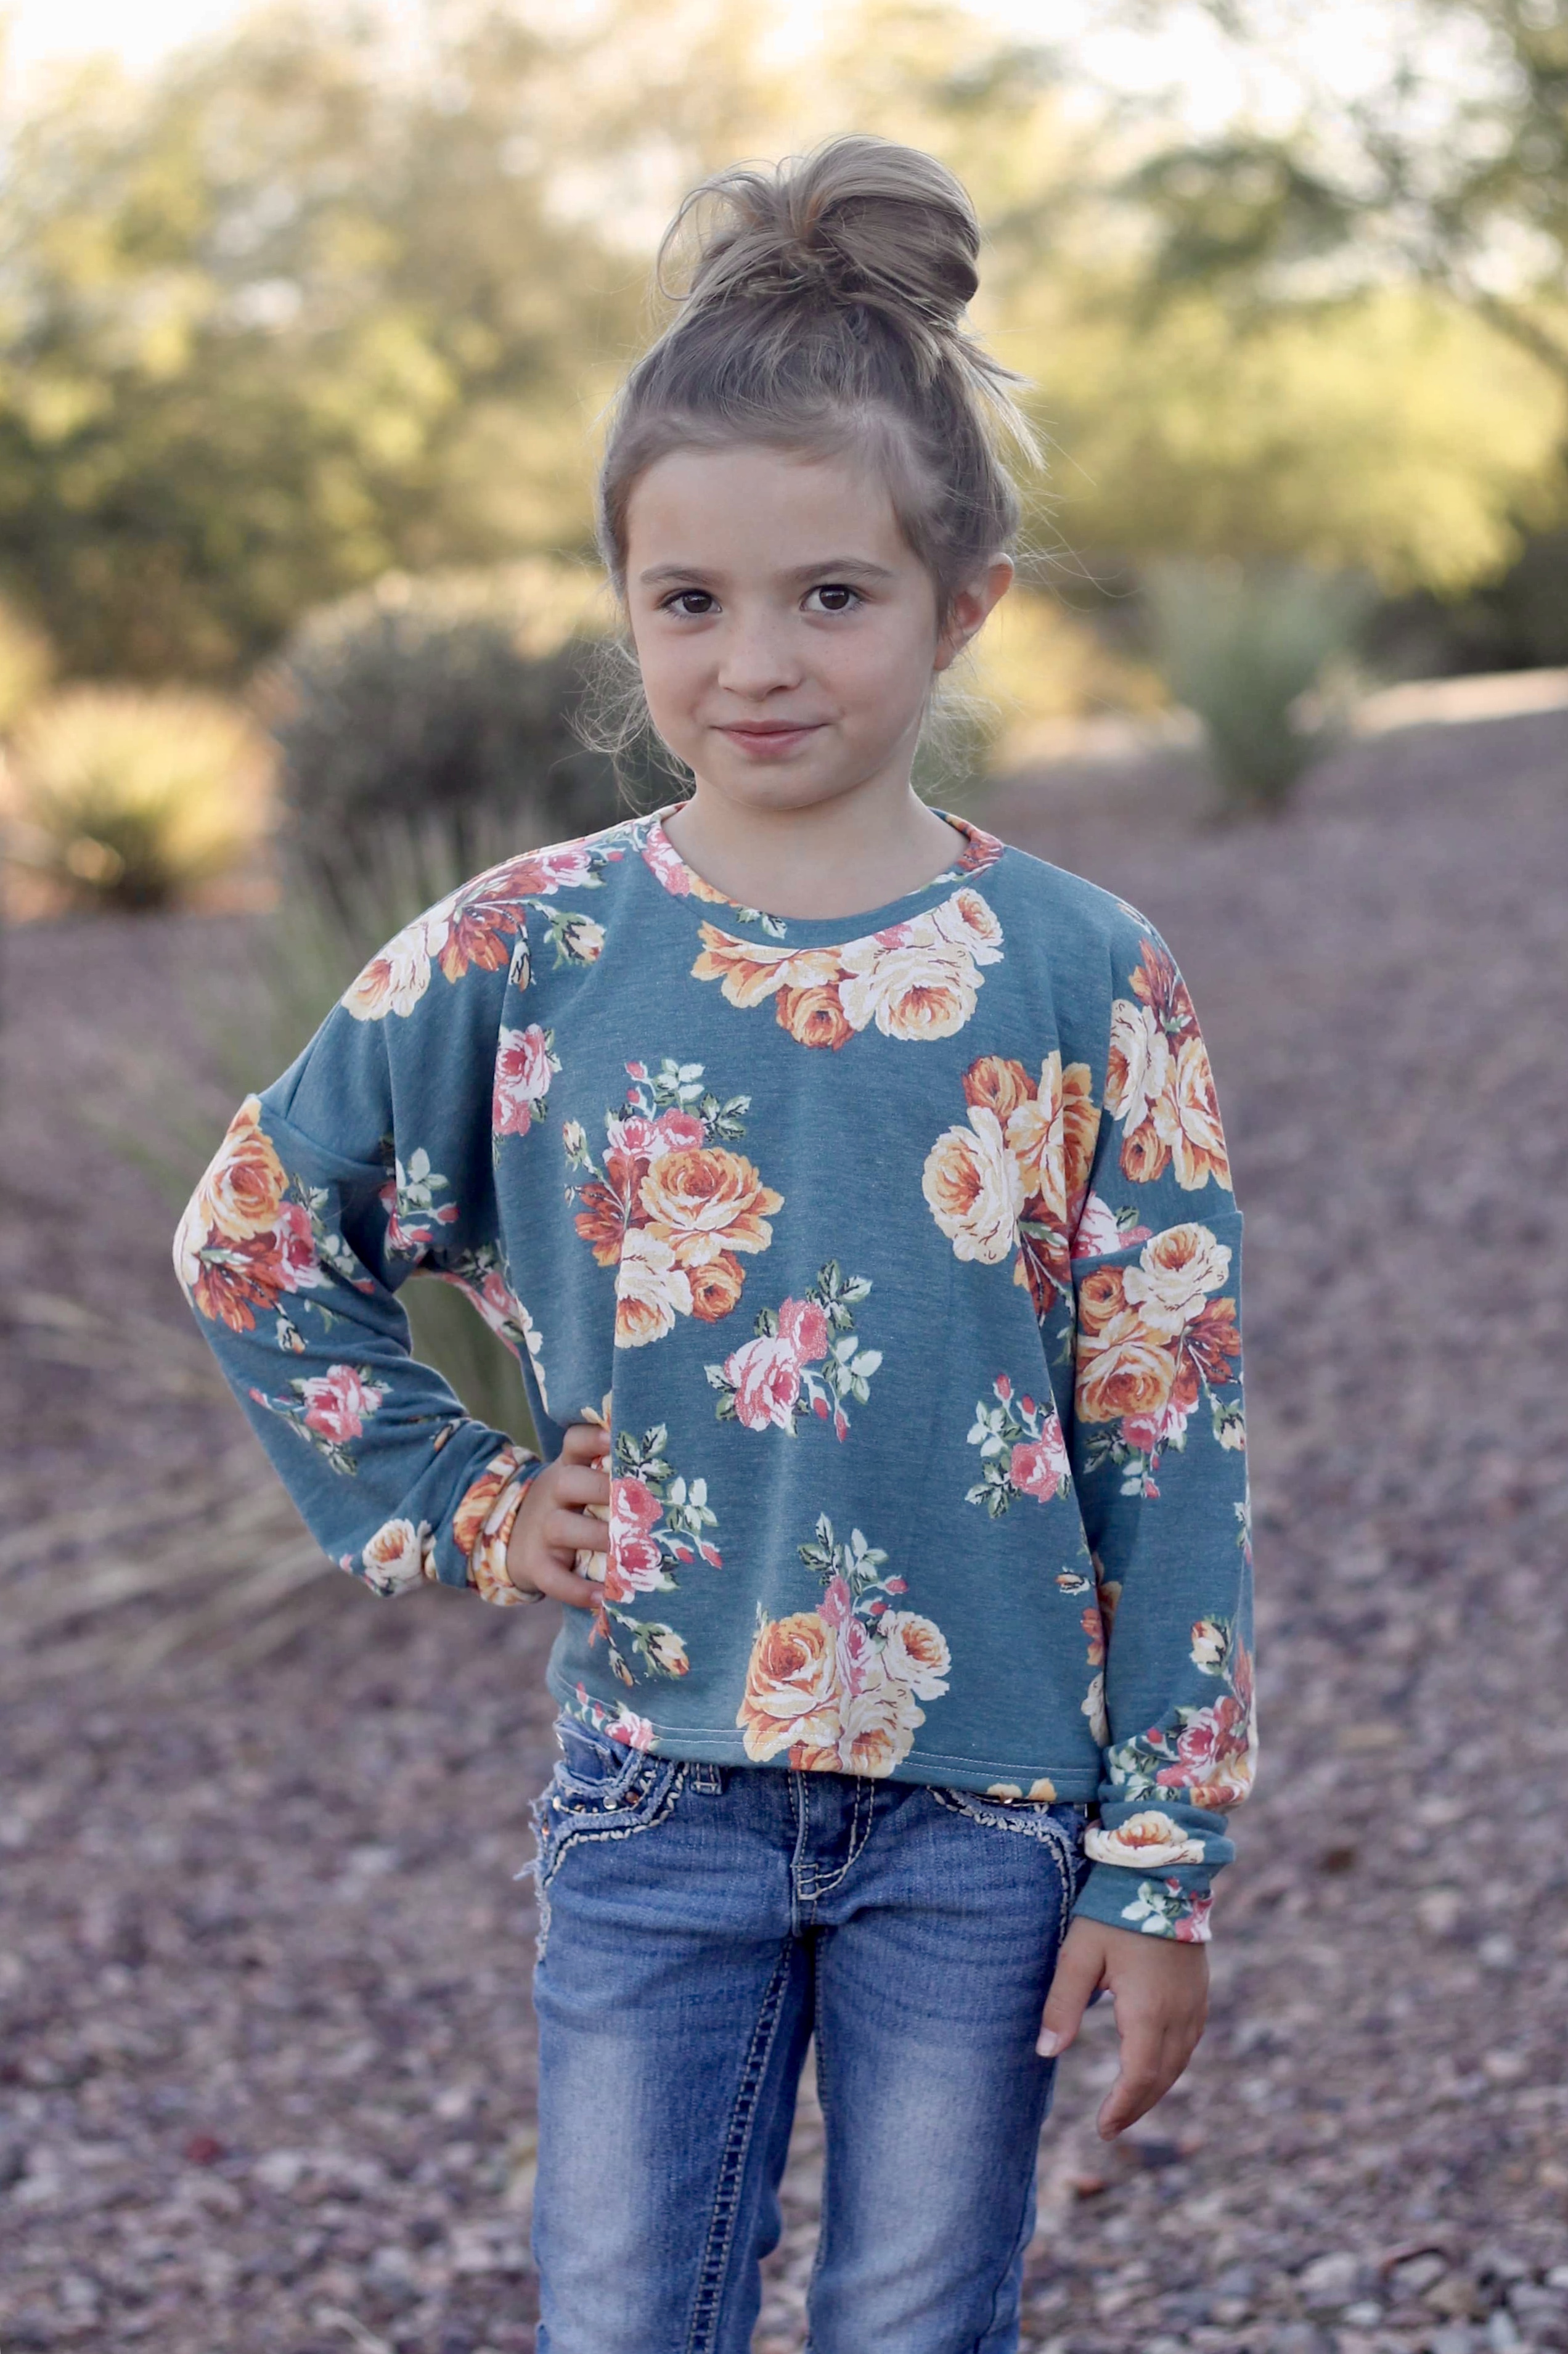 Maize's Oversized Shirt and Hoodie Sizes 2T to 14 Kids PDF Pattern